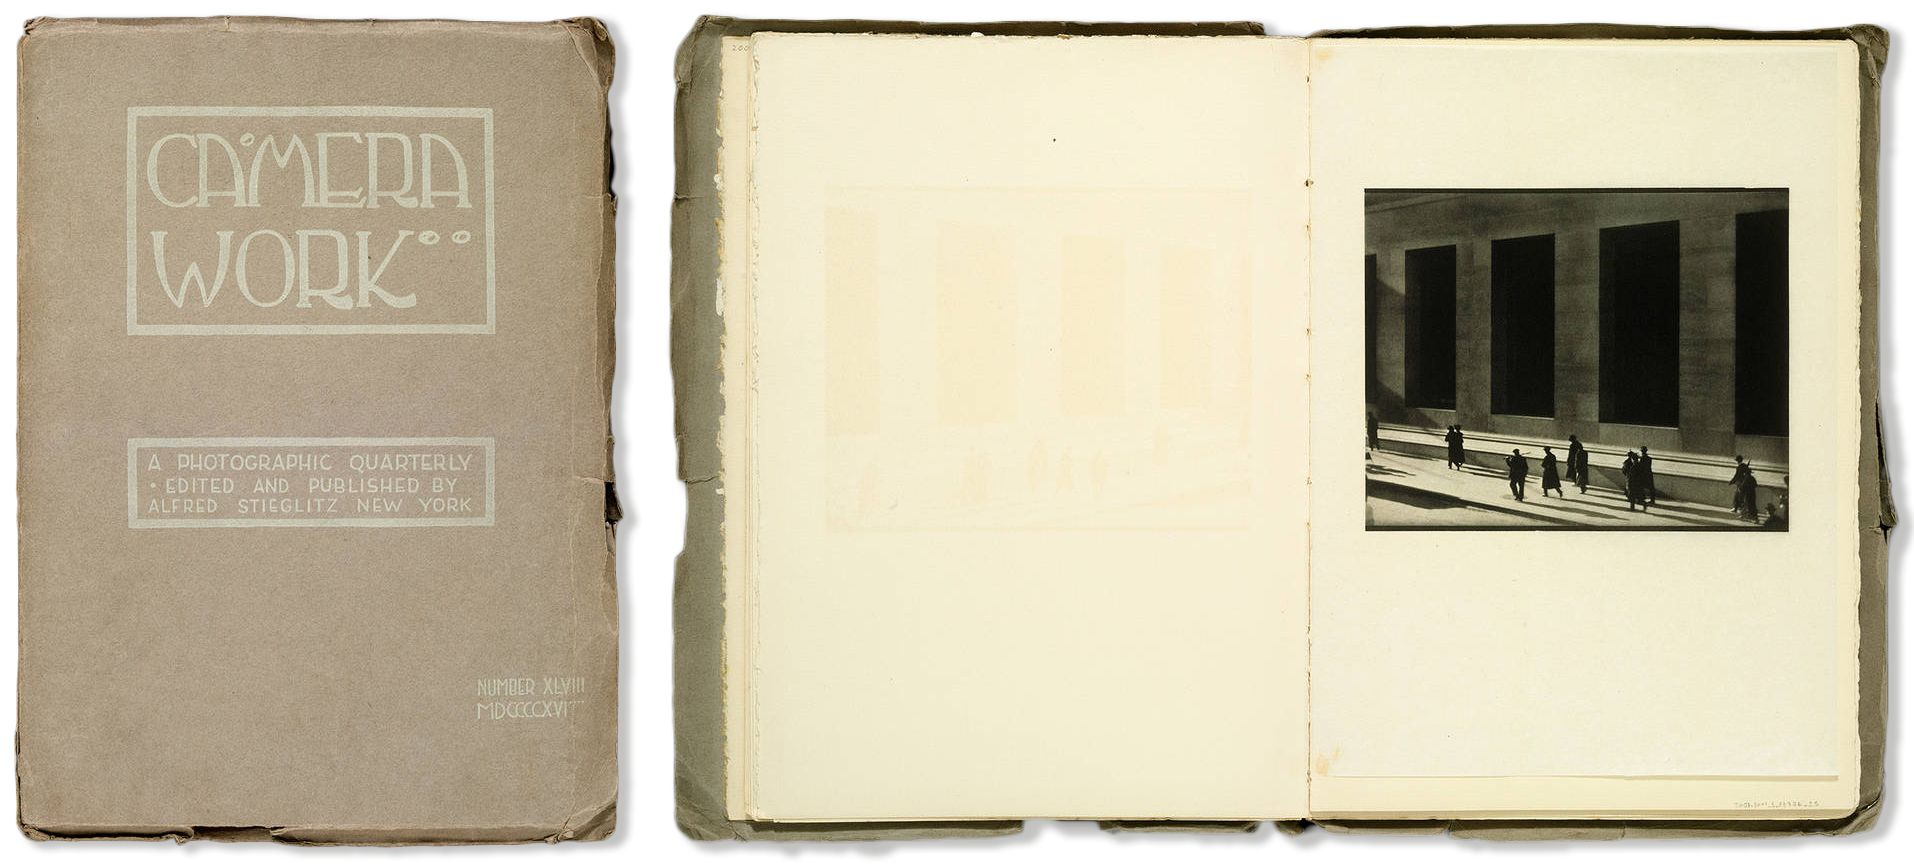 Left: Cover of Camera Work: A Photographic Quarterly, no. 48 (October 1916), published and edited by Alfred Stieglitz, Victoria & Albert Museum, London, U.K. Right: Spread from Camera Work: A Photographic Quarterly, no. 48 (October 1916), featuring Paul Strand, New York, 1916, Victoria & Albert Museum, London.